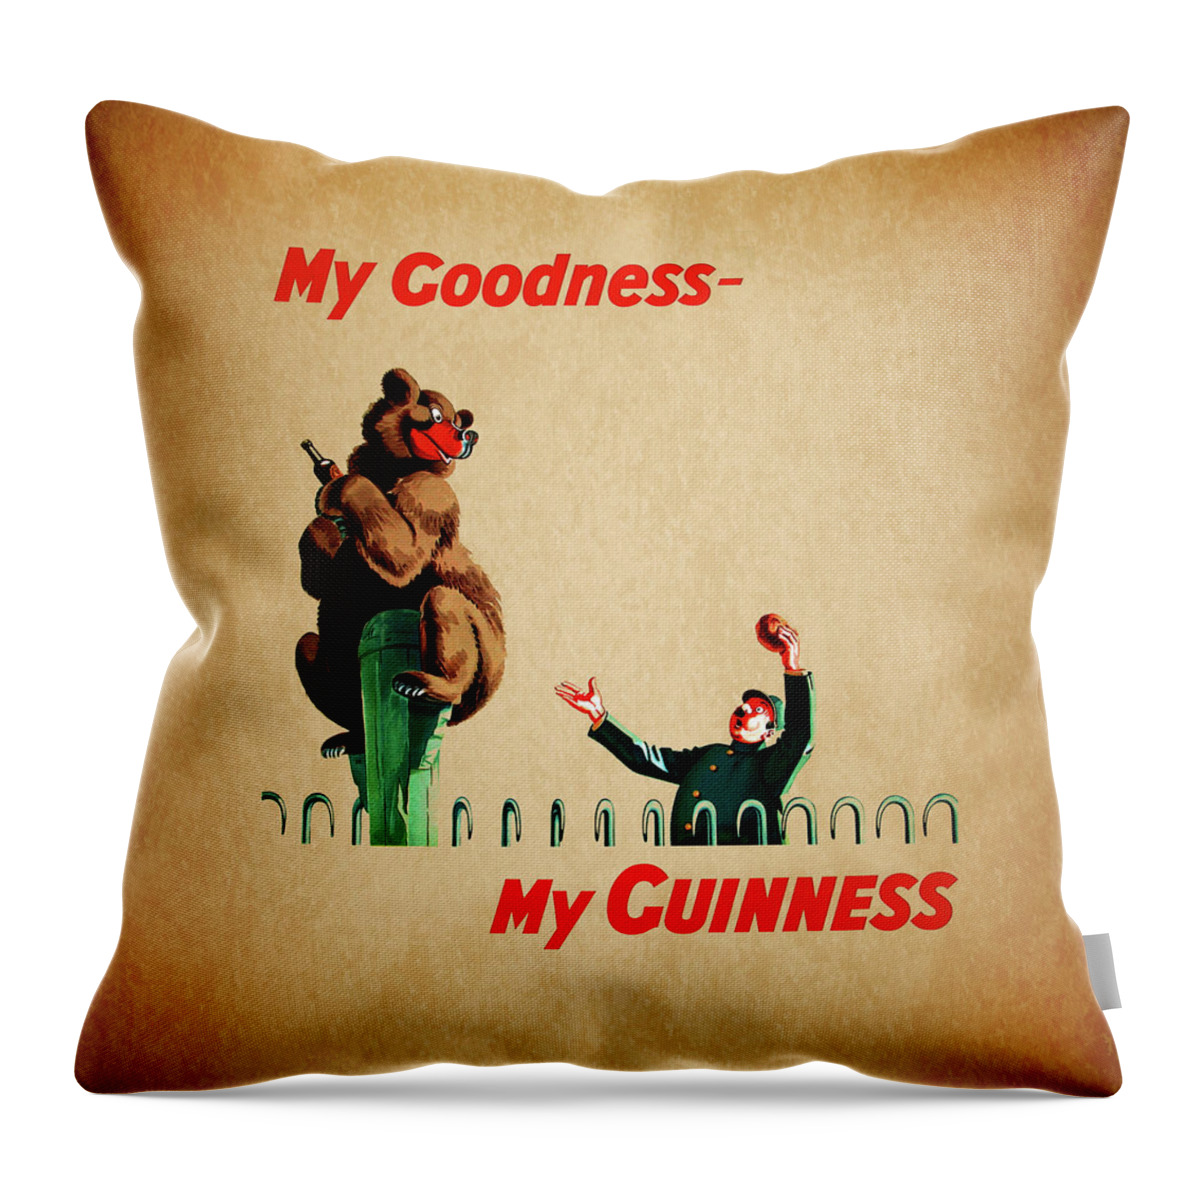 Guinness Throw Pillow featuring the photograph My Goodness My Guinness 2 by Mark Rogan